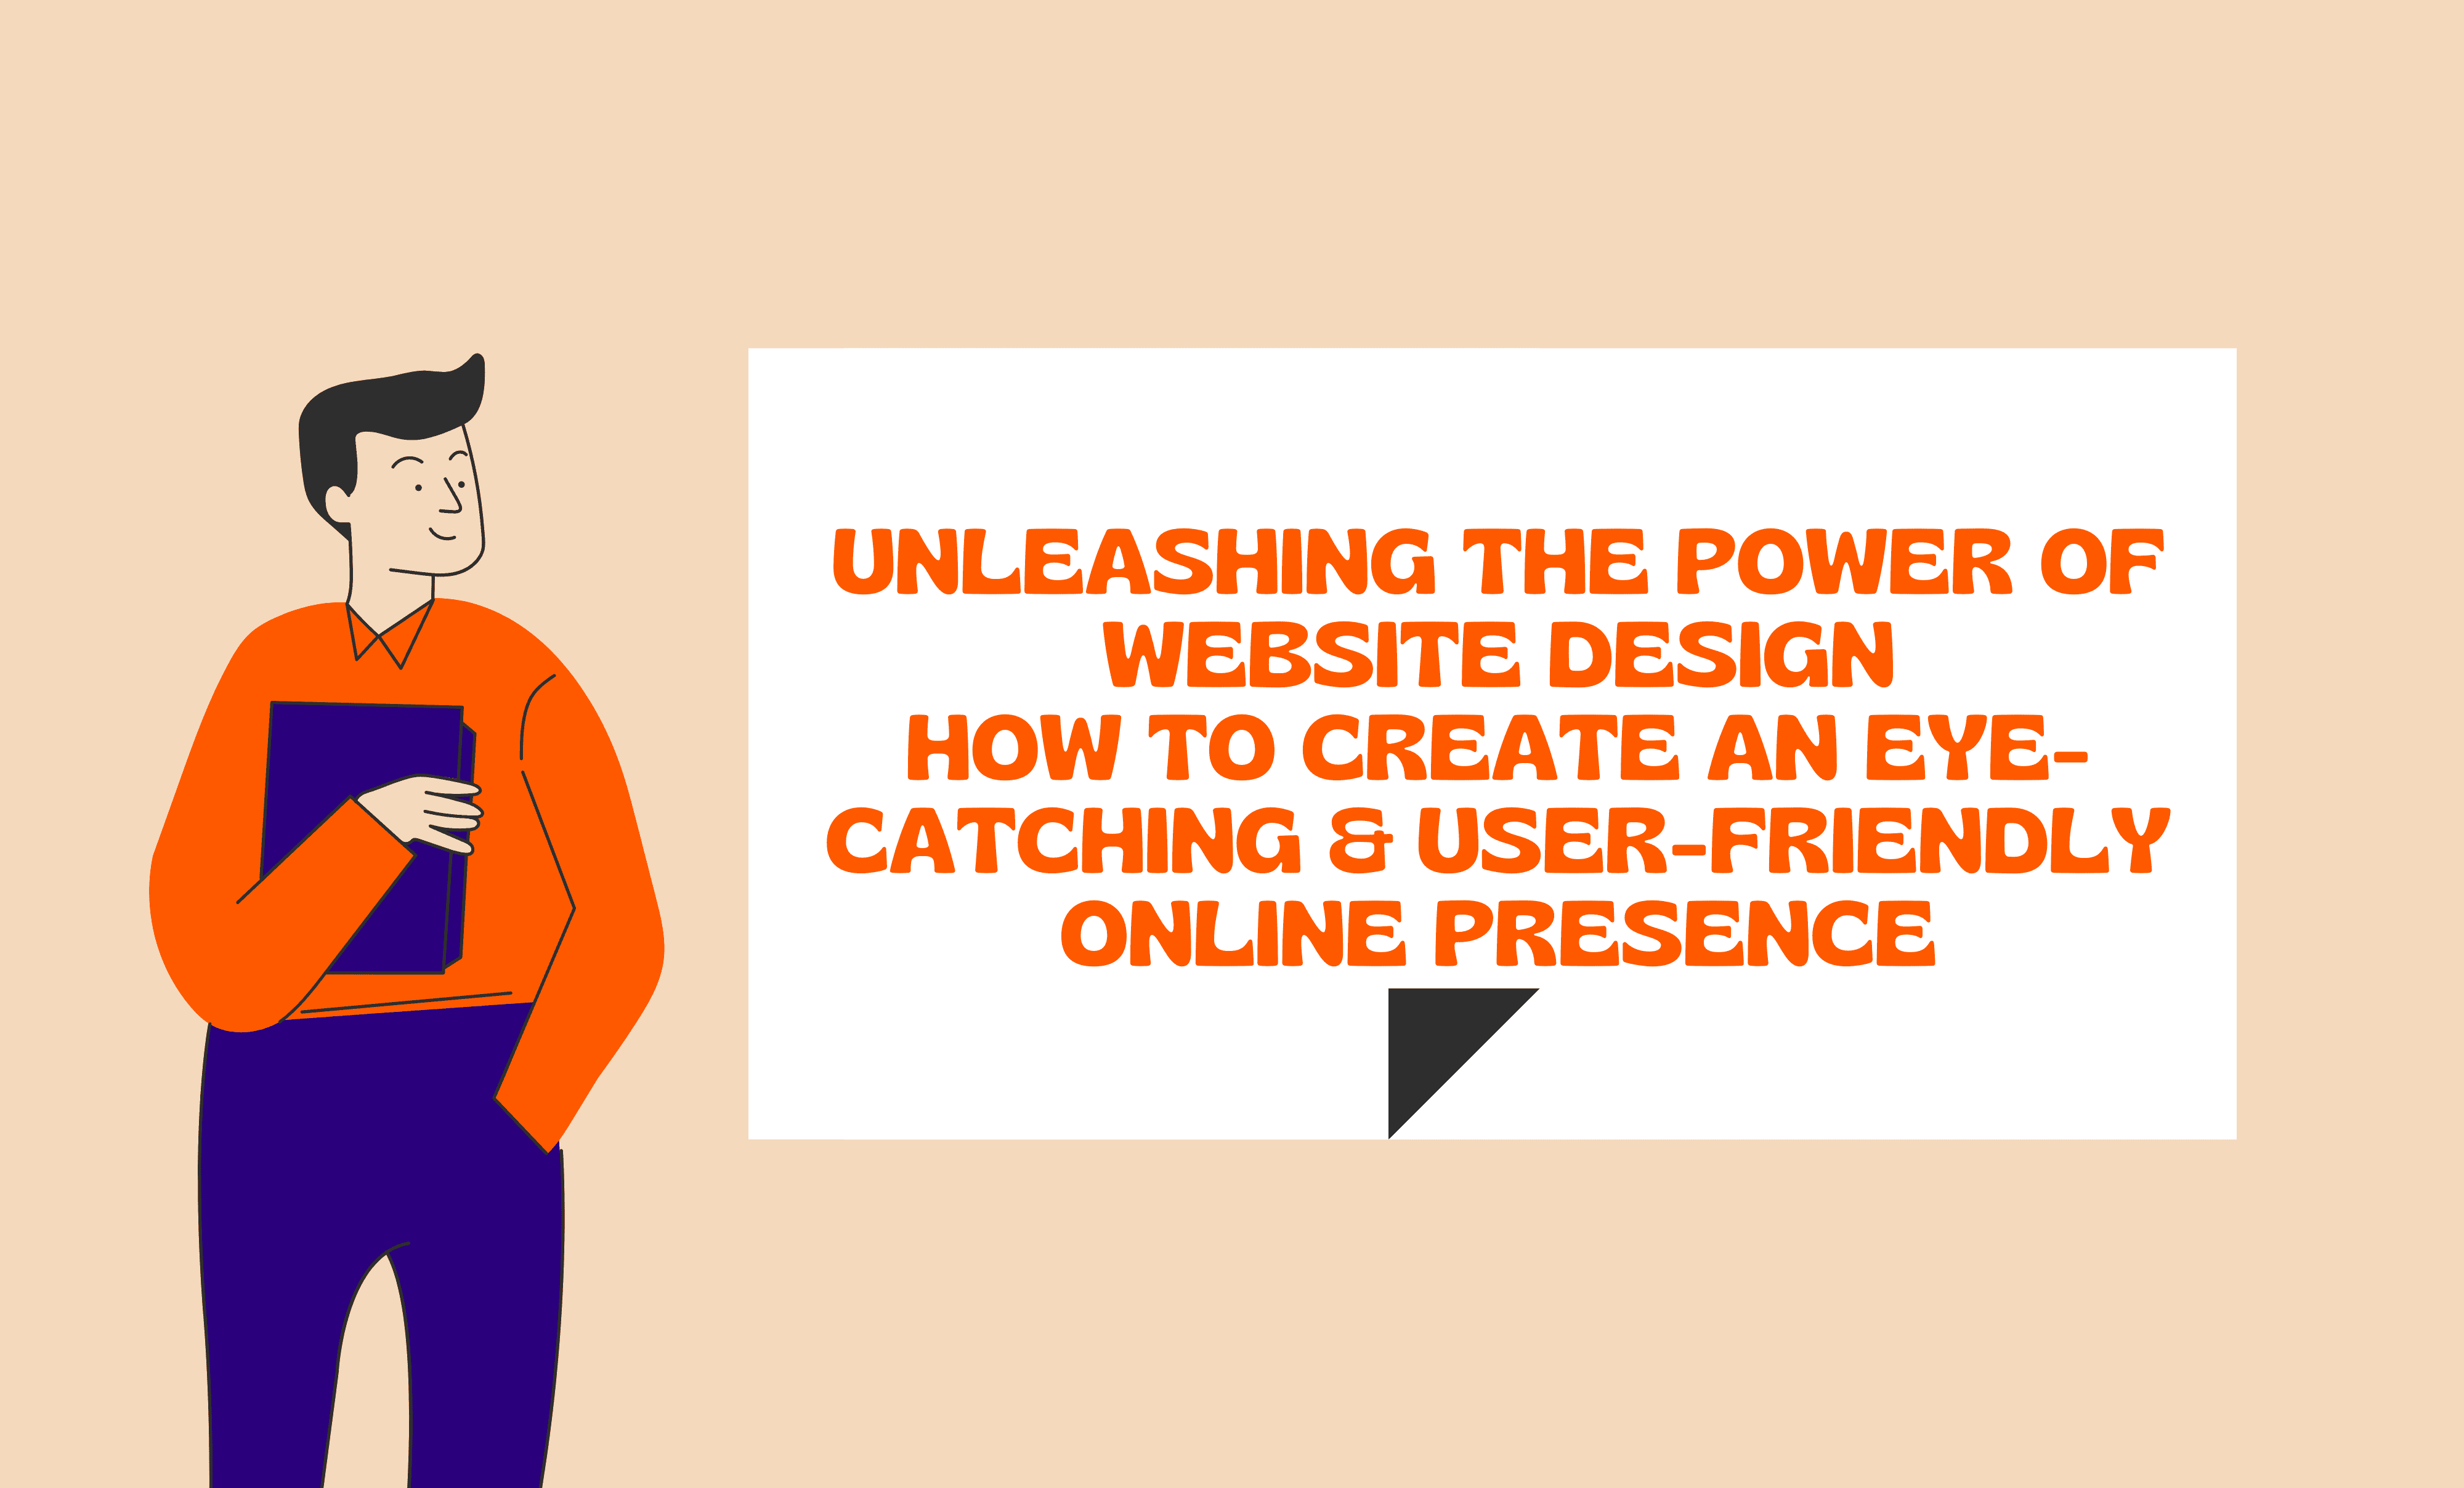 Unleashing the Power of Website Design How to Create an Eye-Catching & User-Friendly Online Presence